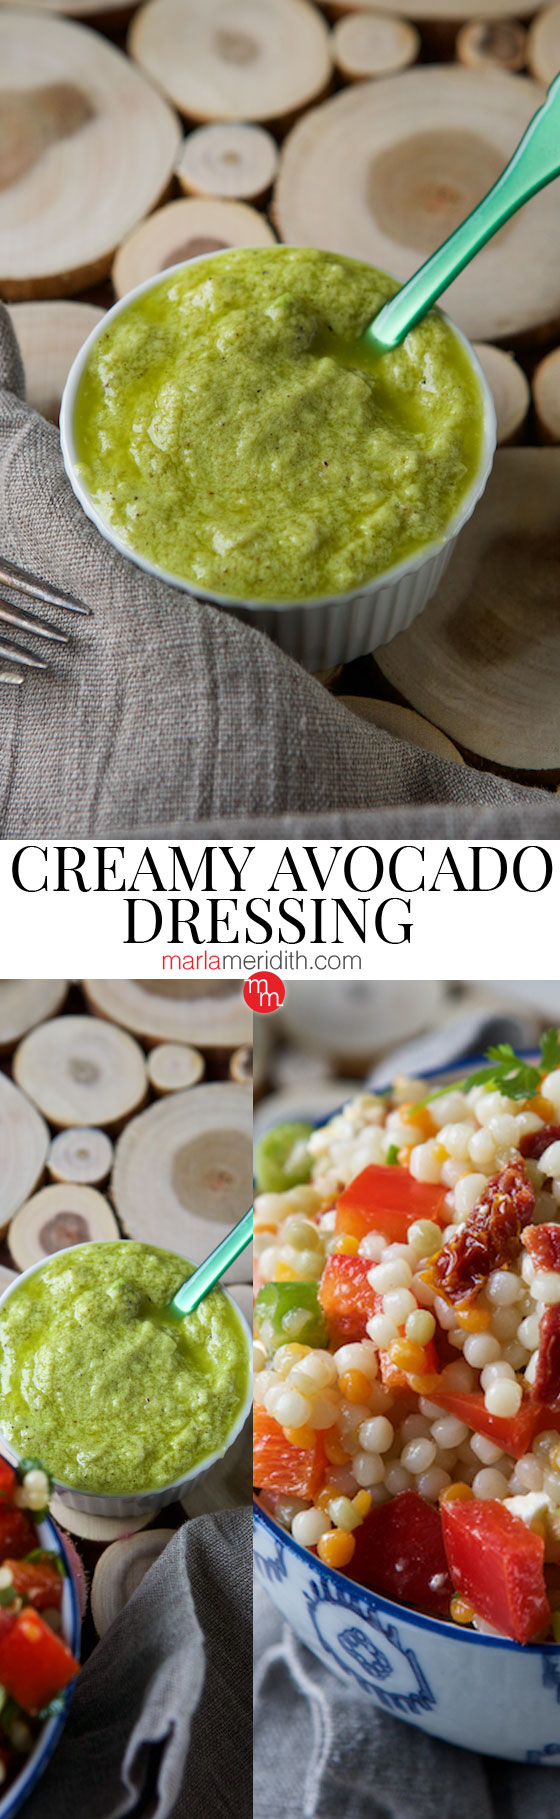 Veggie Couscous with Creamy Avocado Dressing | recipe can be found on MarlaMeridith.com ( @marlameridith )